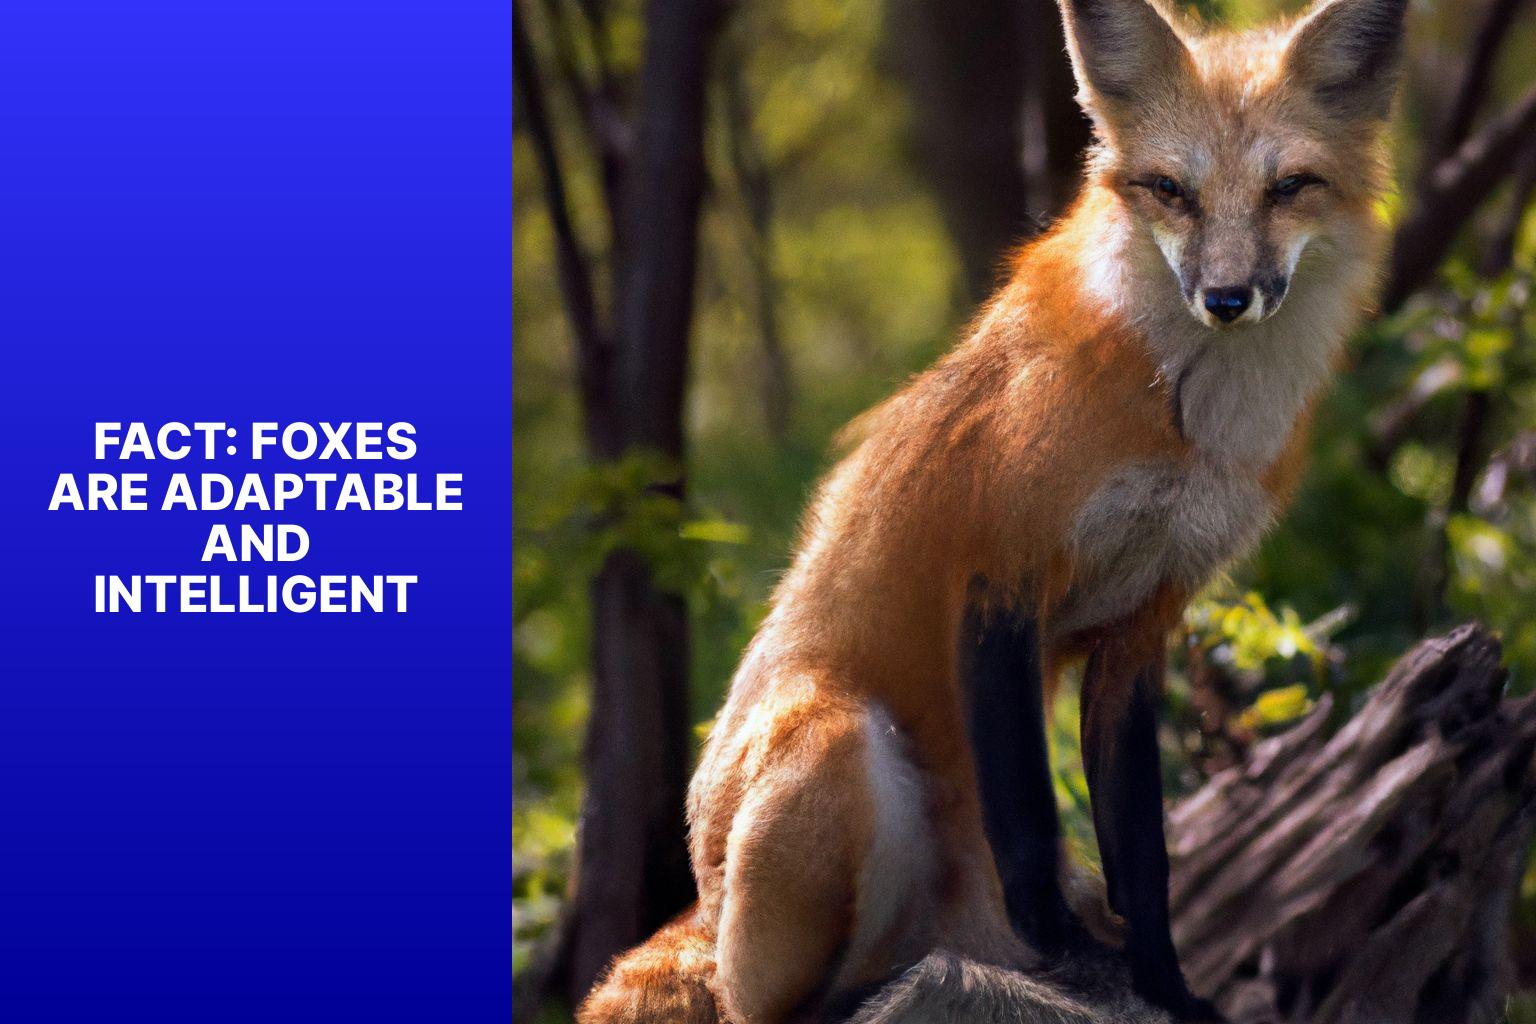 Fact: Foxes Are Adaptable and Intelligent - Fox Myths vs Facts 